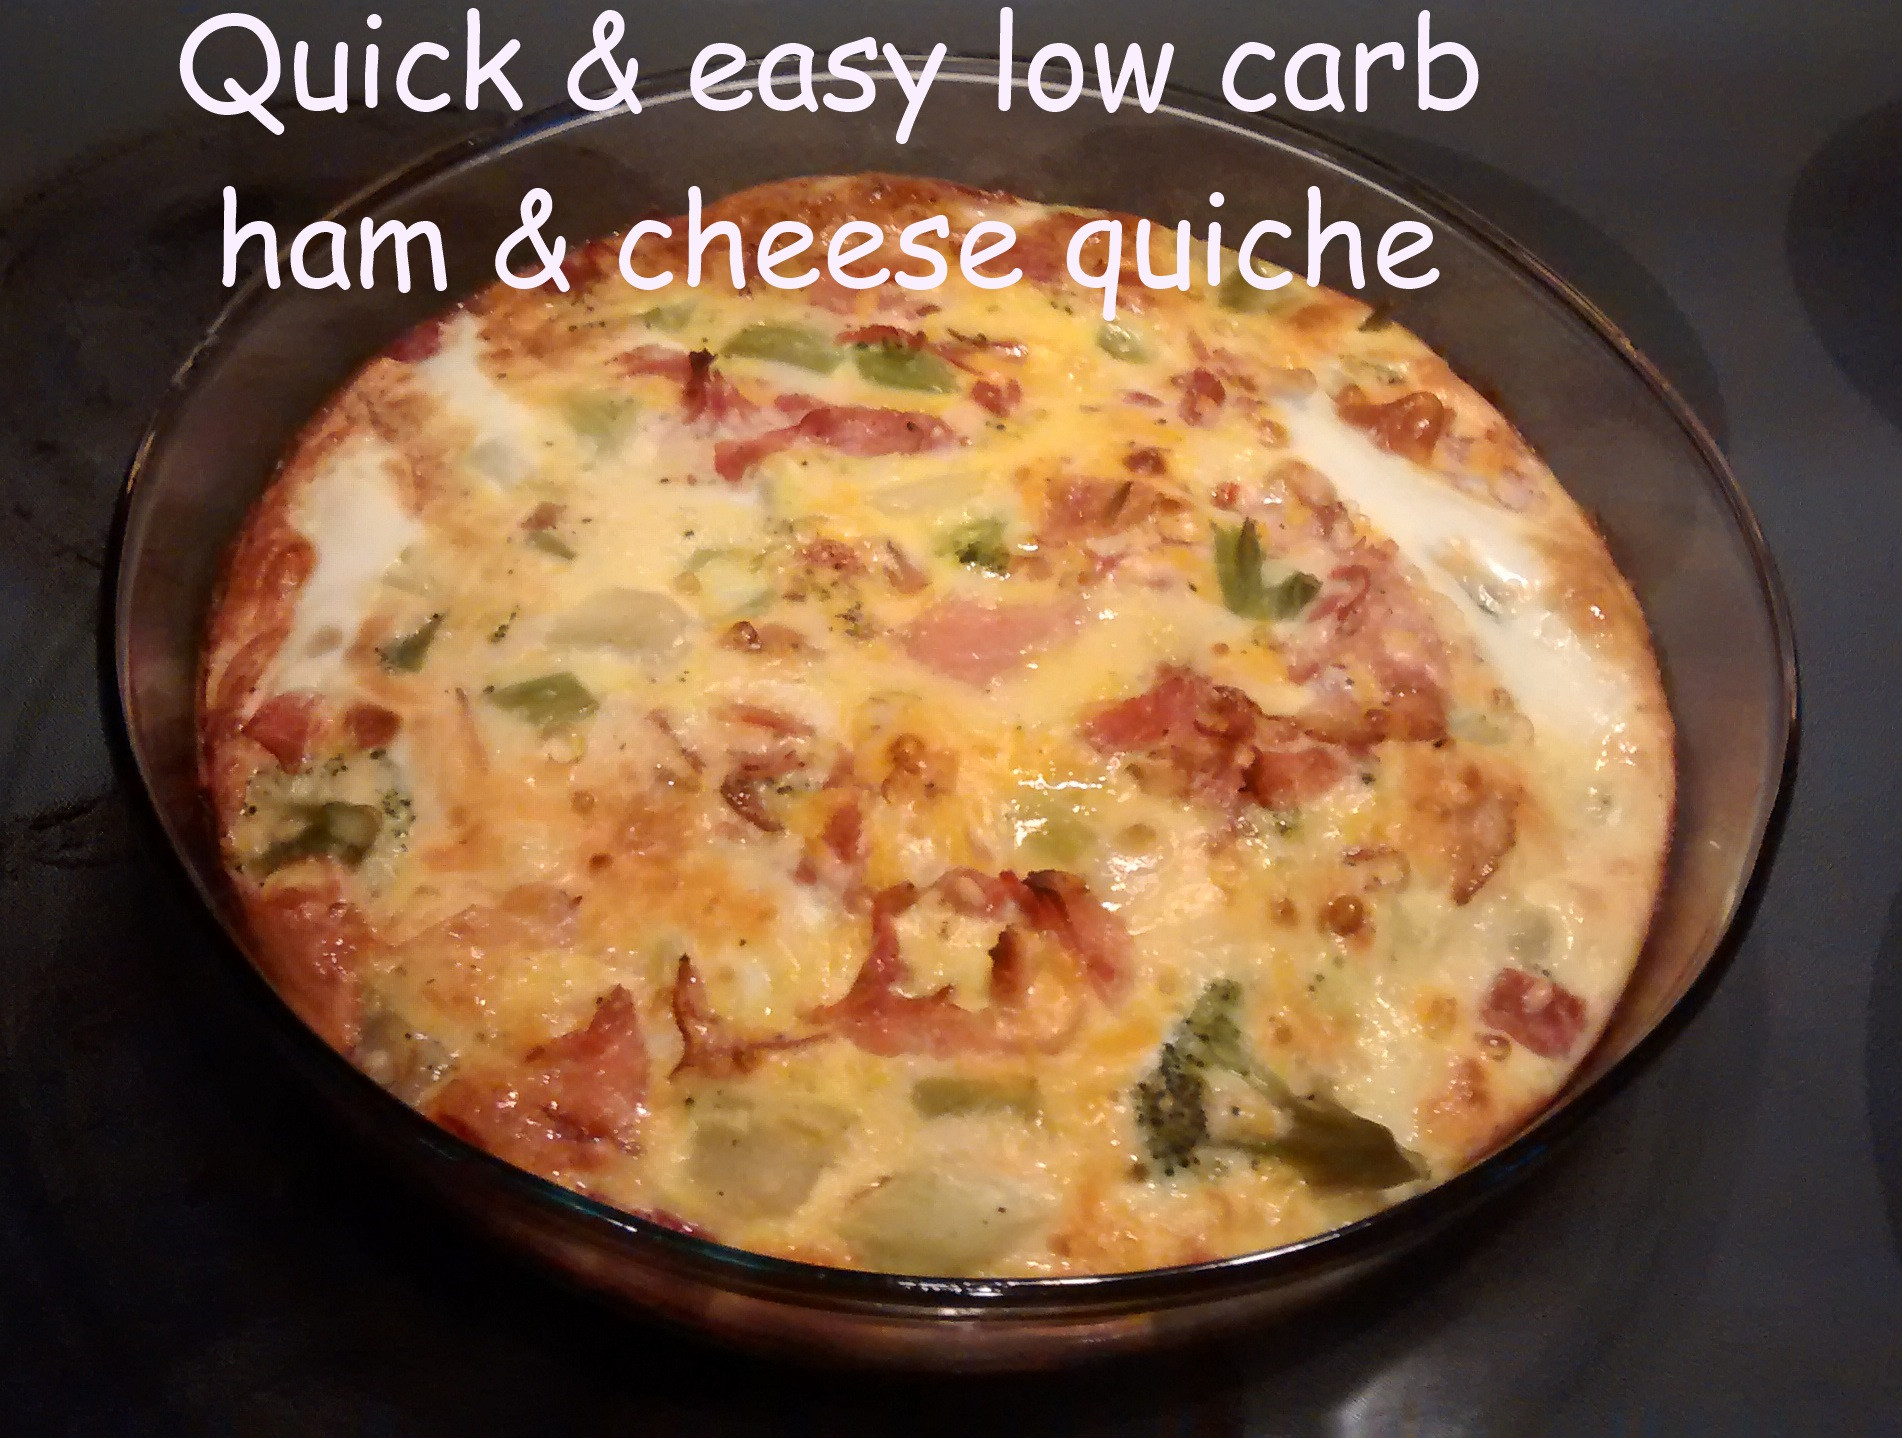 Quick And Easy Low Carb Recipes
 Dukan Diet recipe Quick and easy low carb recipe for ham